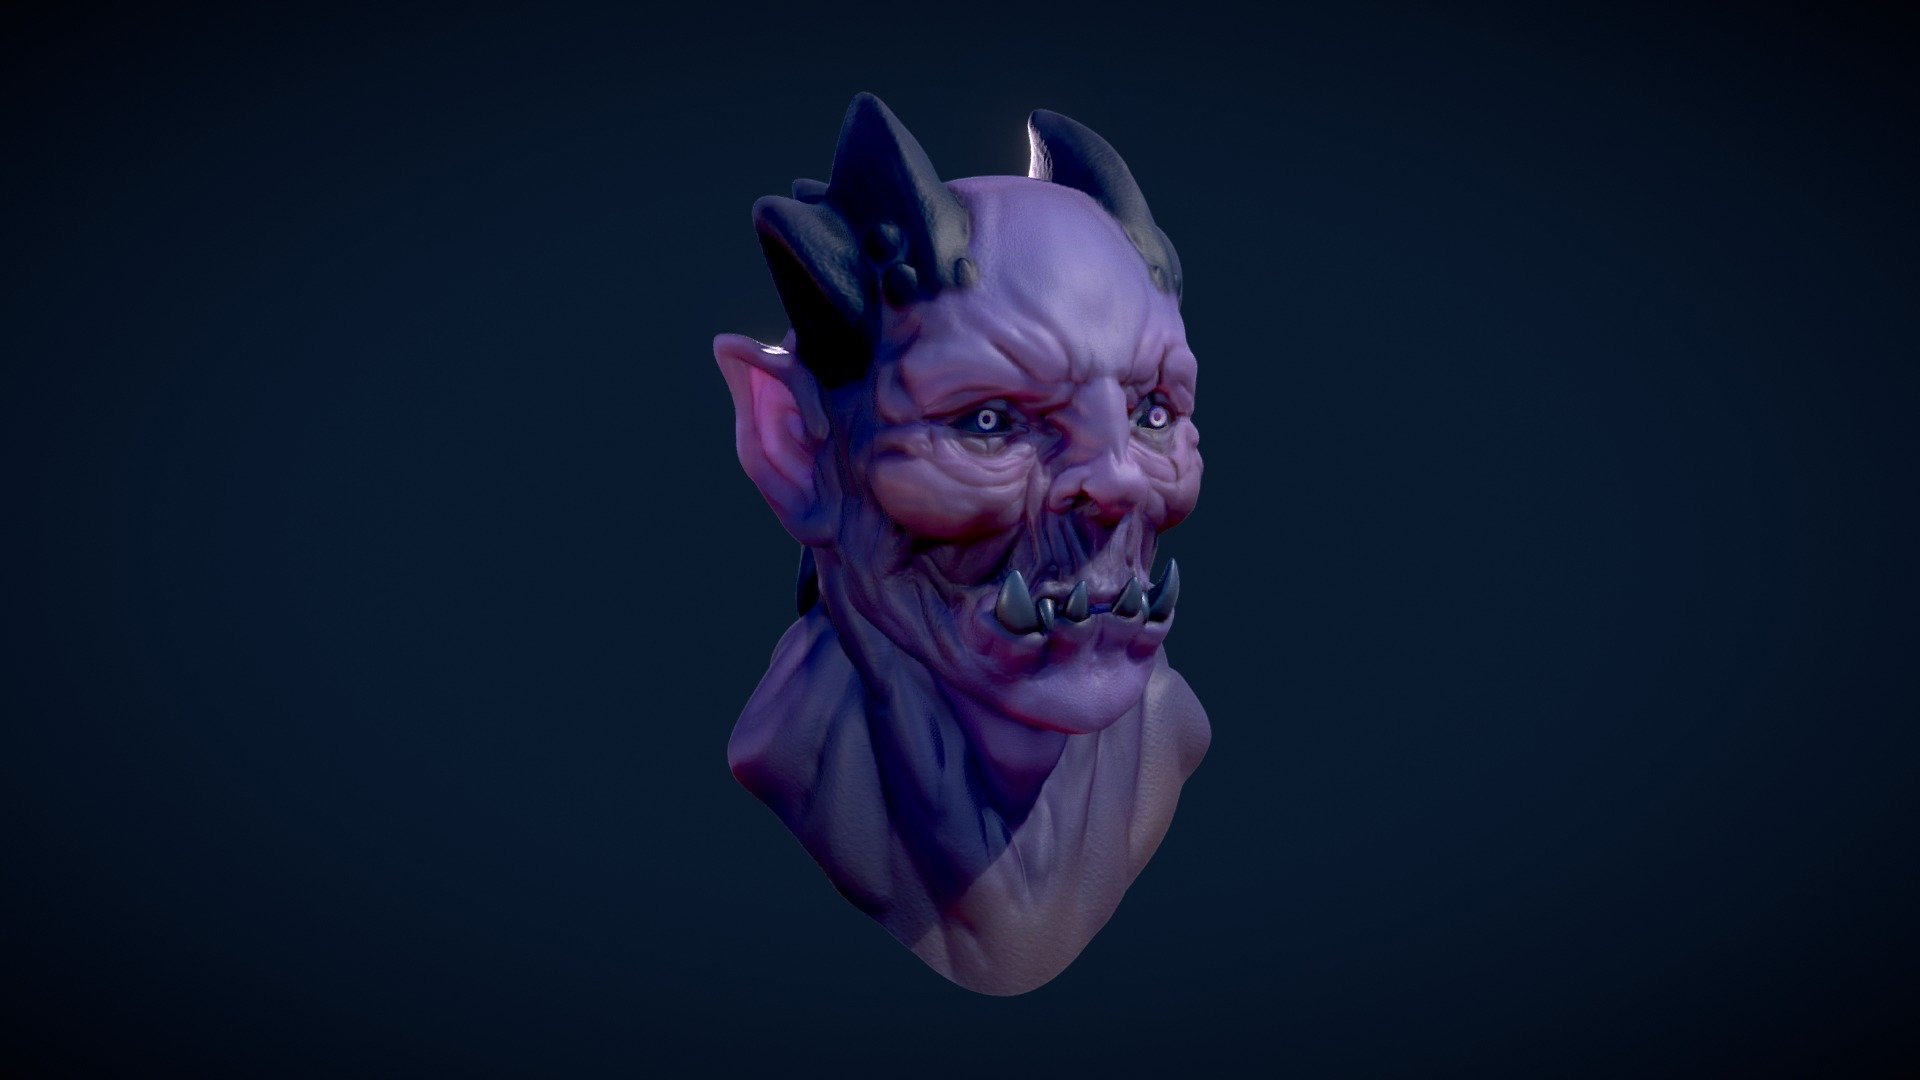 Concept, model and textures made by me! This is my first sculpt in 2 years.

I’ve been working on this model on and off for about 2 weeks 3d model